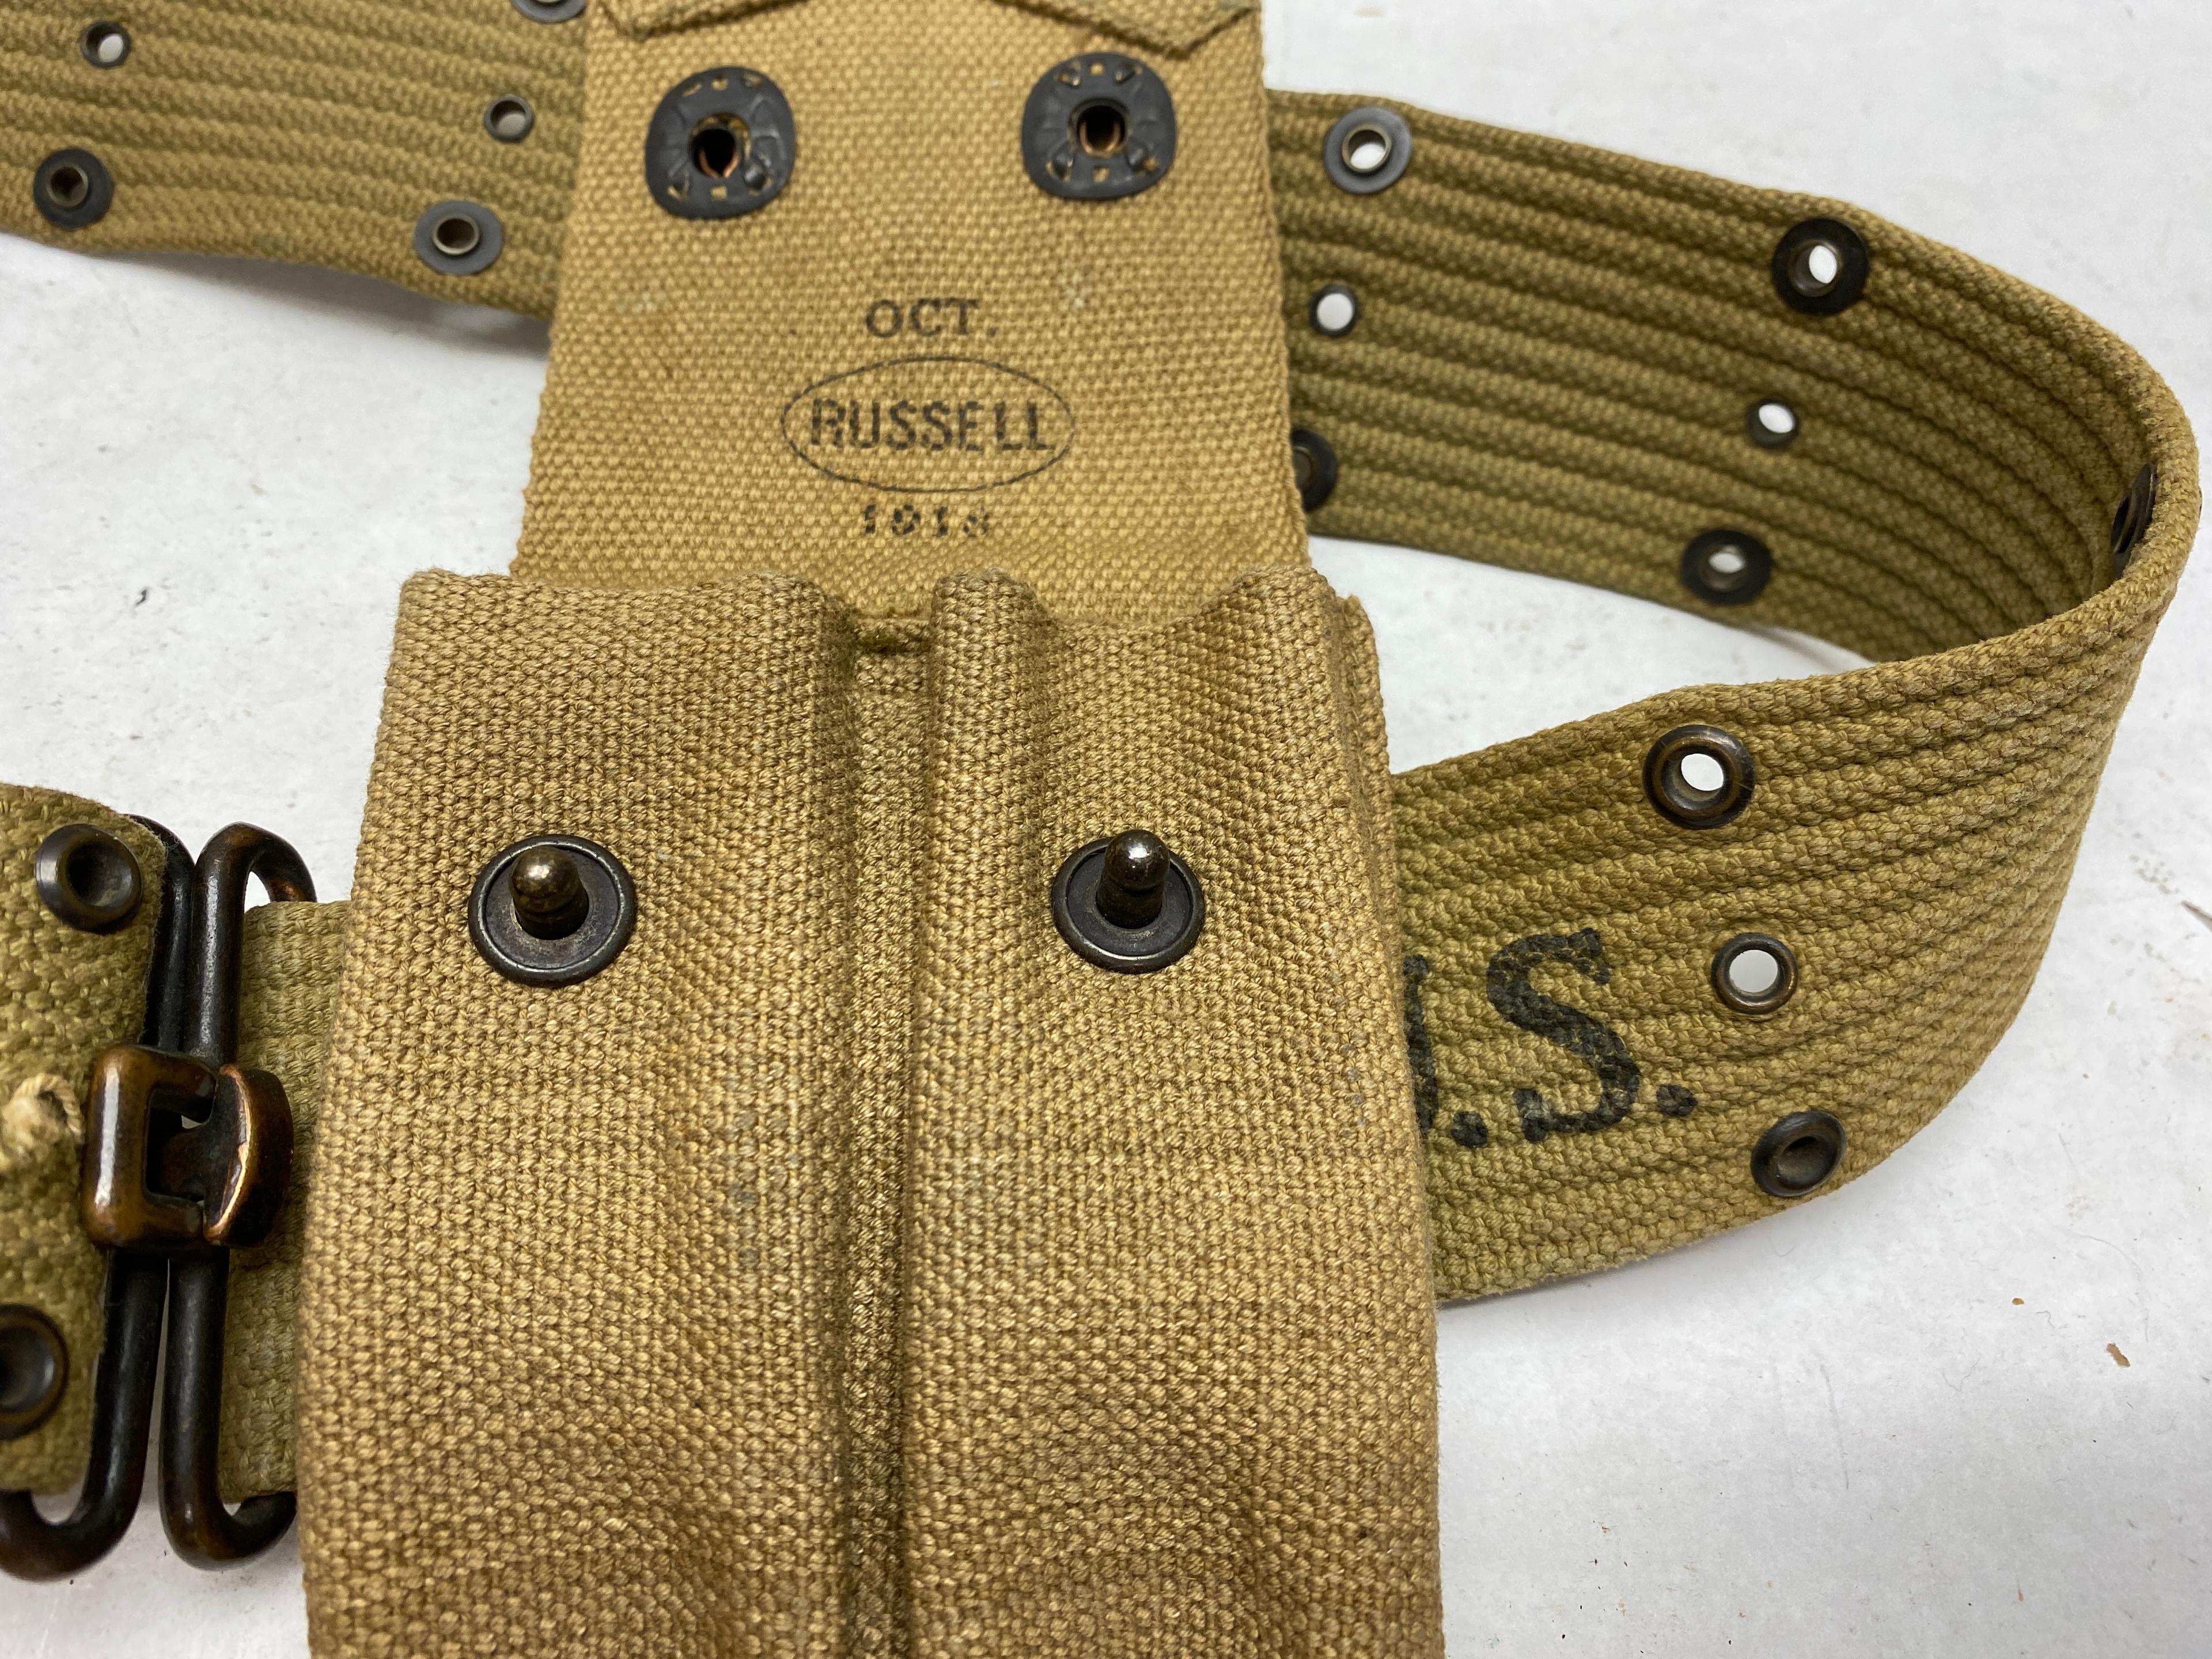 U.S. WWII ERA GUN BELT WITH HOLSTER AND MAG POUCH